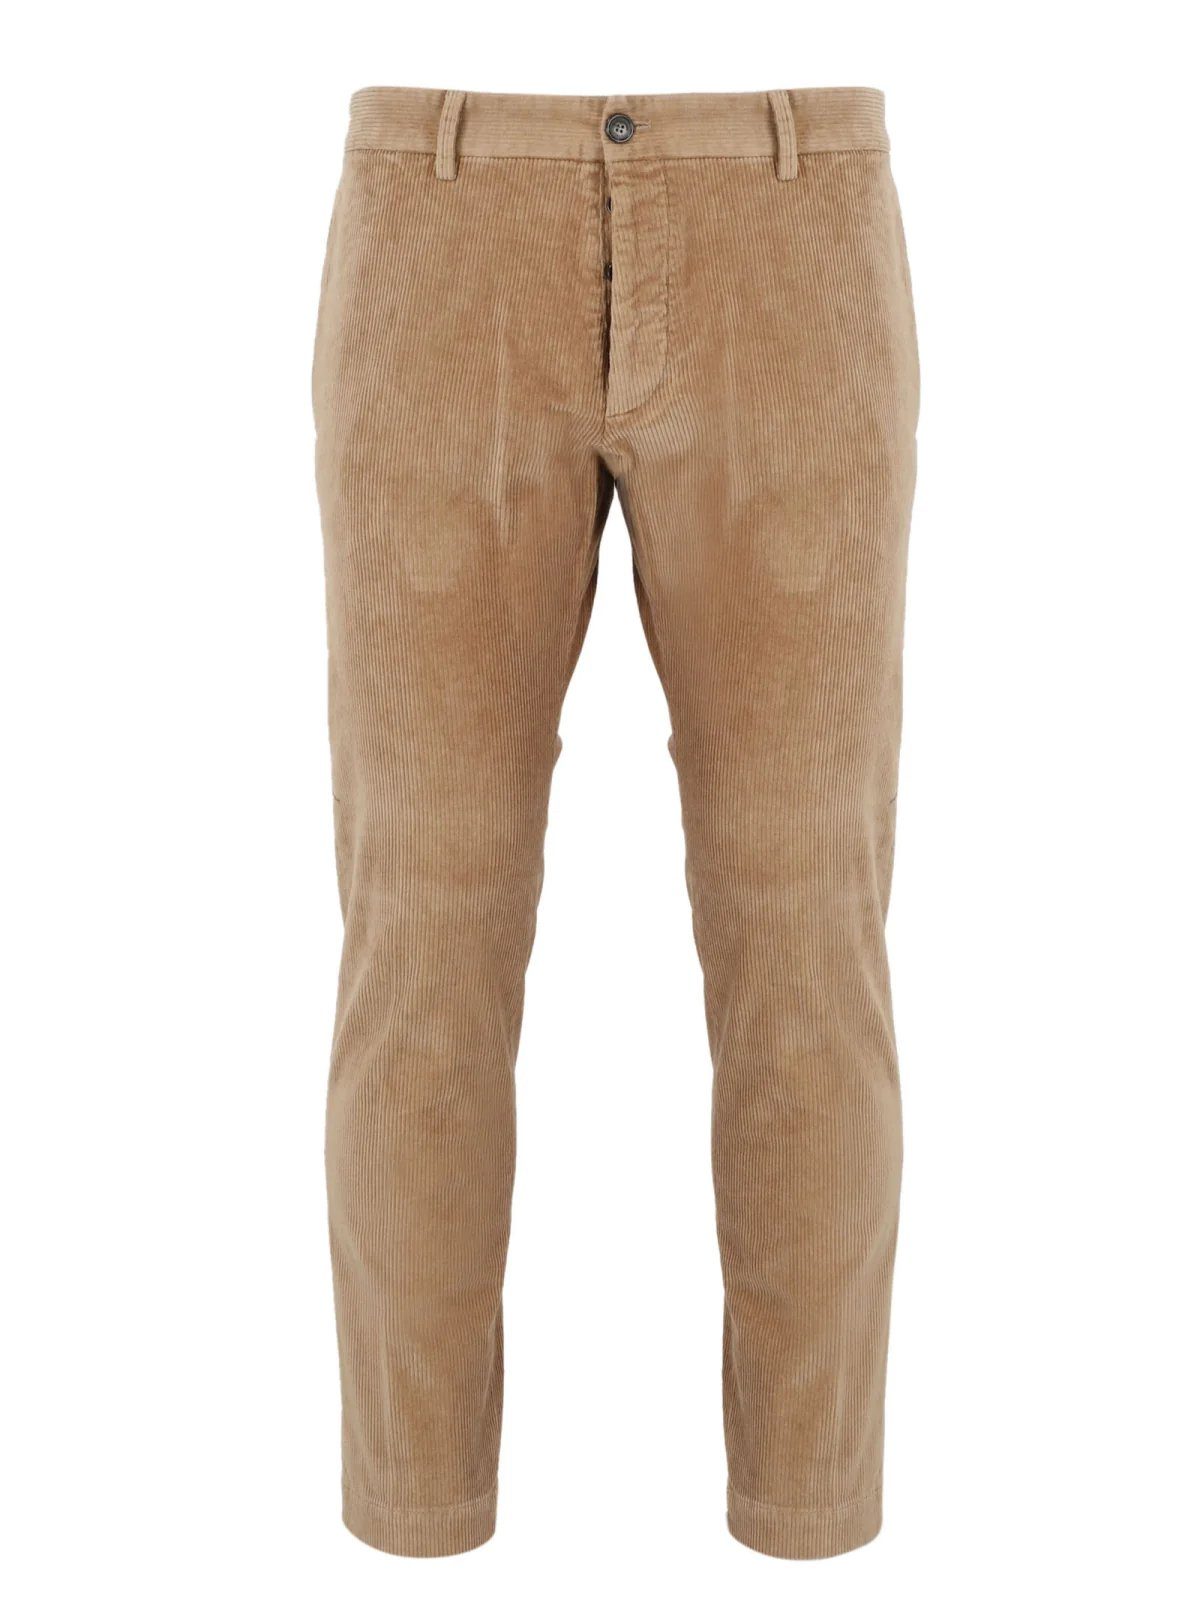 GUY COOL TRS Cordhose Dsquared2